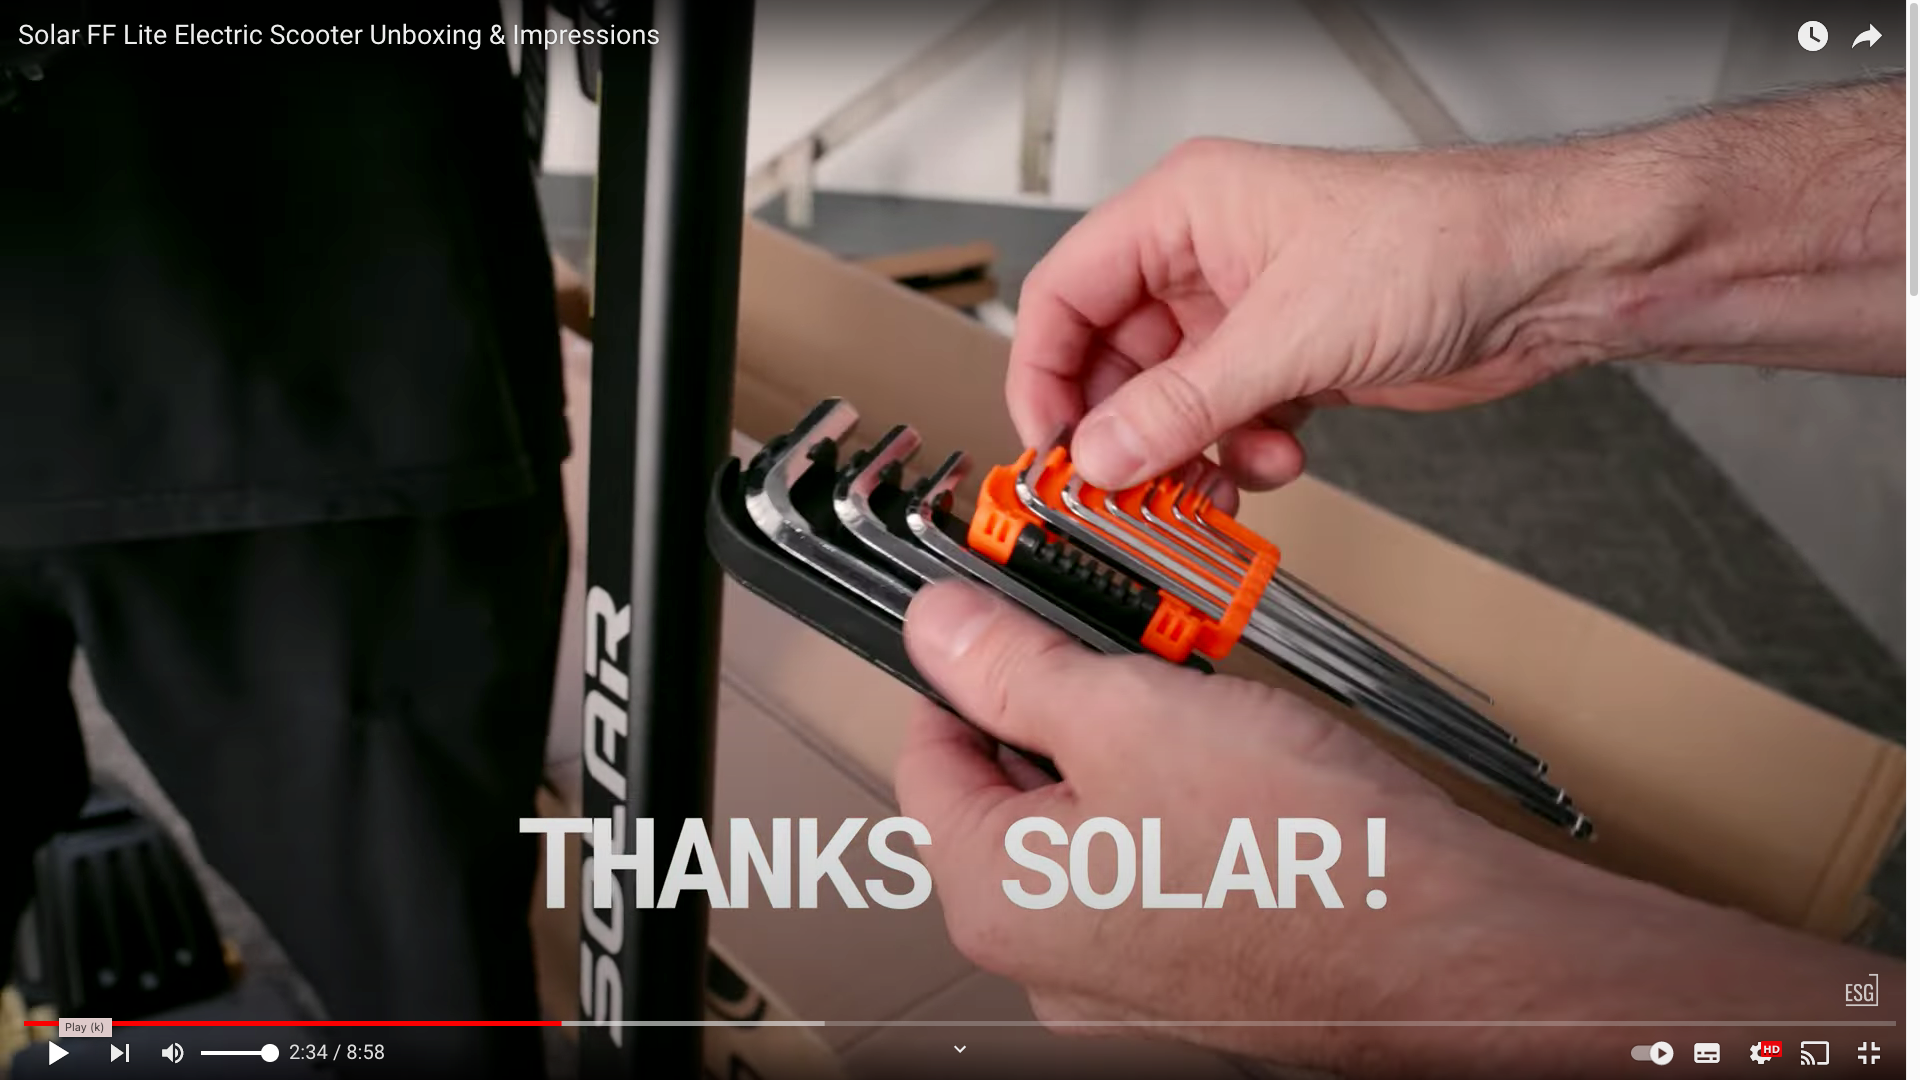 Solar FF Lite Included Tools